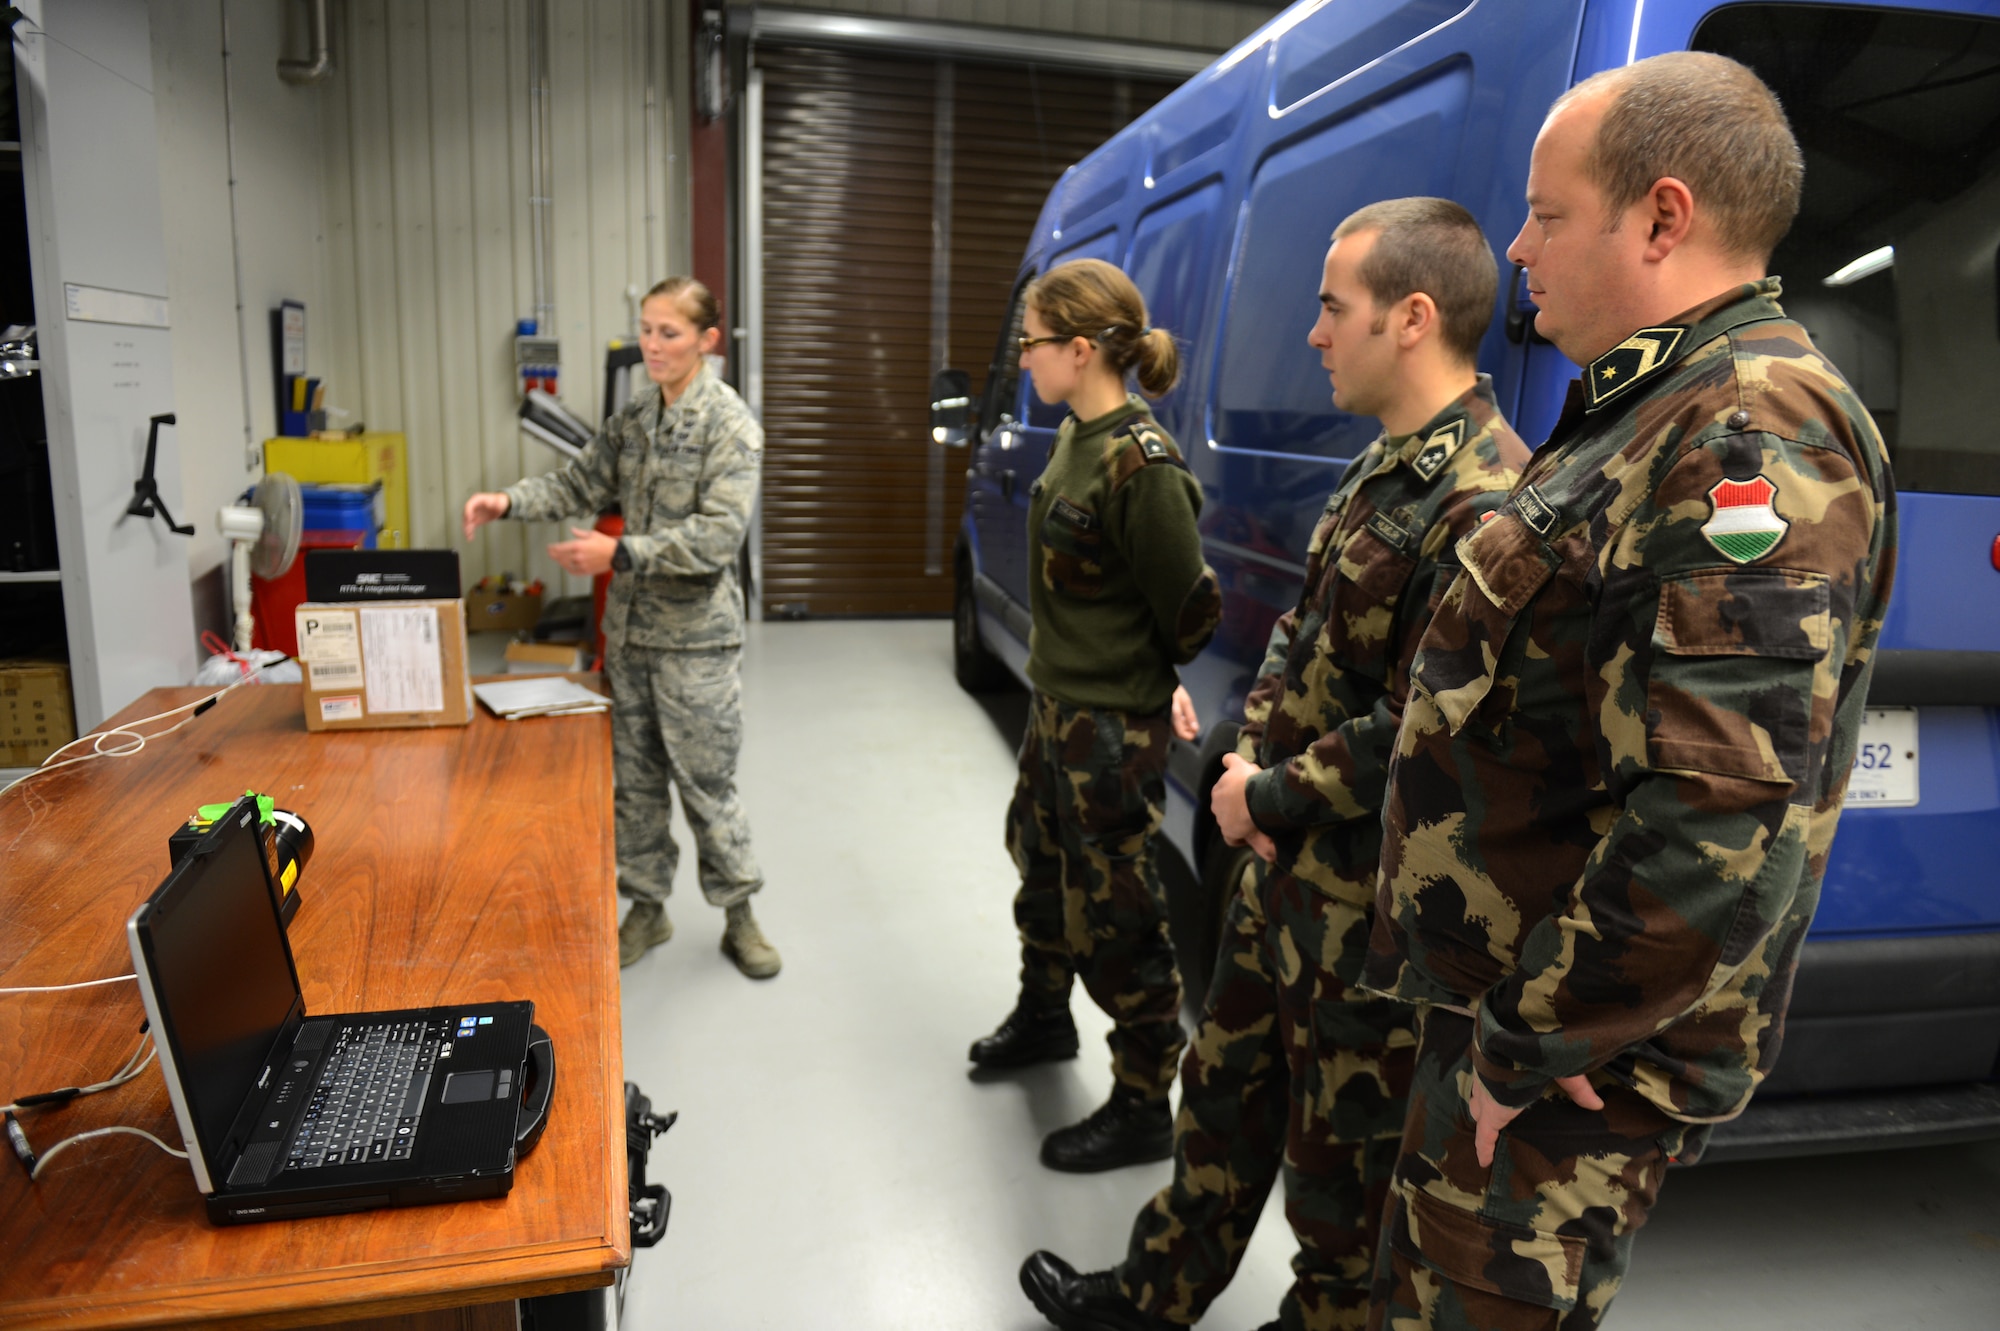 SPANGDAHLEM AIR BASE, Germany – Members of the Hungarian army learn about an XRS-3 X-ray kit at the 52nd Civil Engineer Squadron Explosive Ordnance Disposal shop Dec. 4, 2012. Hungarian army members visited Spangdahlem AB to join forces in teaching information on the most current threats in contingency operations across the globe. The X-ray kit is a primary piece of equipment for counter improvised-explosive-device operations. (U.S. Air Force photo by Airman 1st Class Gustavo Castillo/Released)